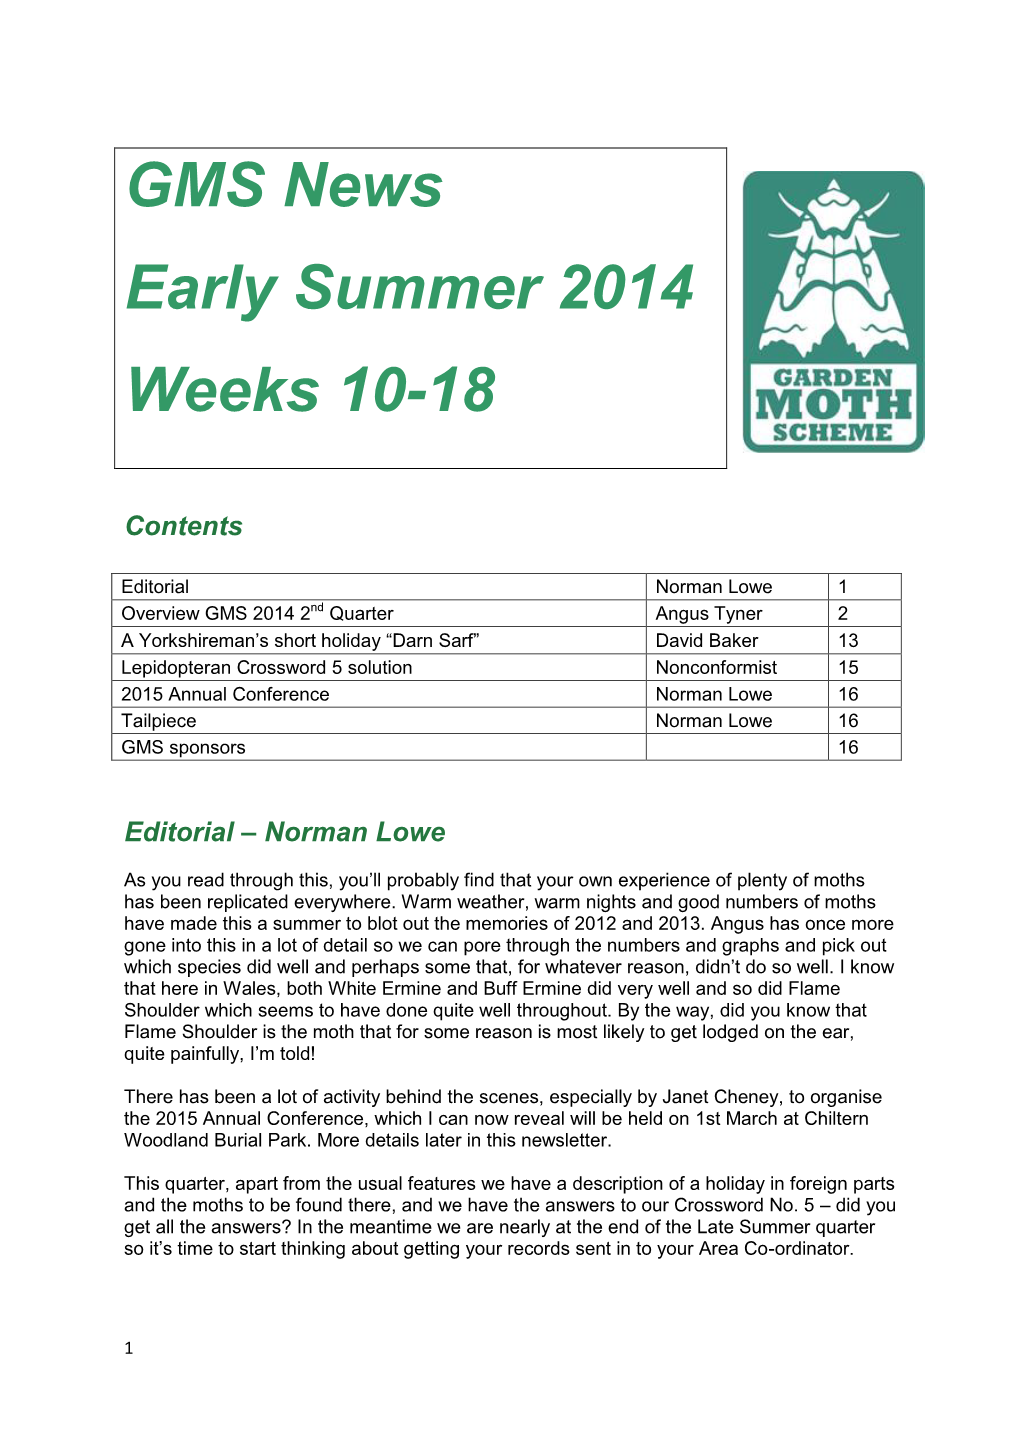 GMS News Early Summer 2014 Weeks 10-18